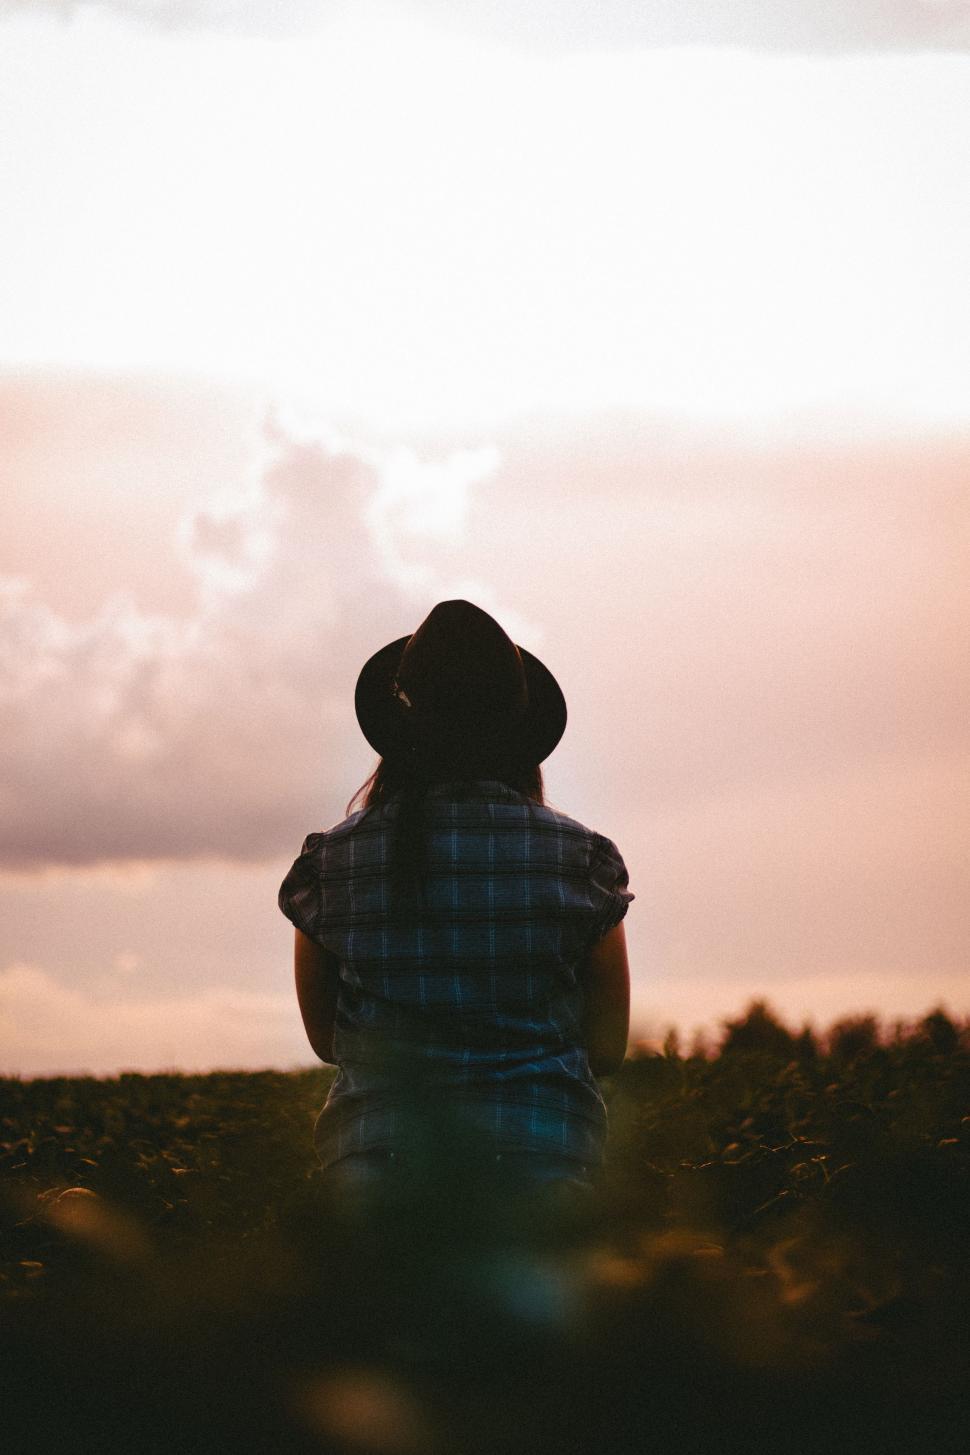 Free Image of Person Sitting in Field With Hat On 